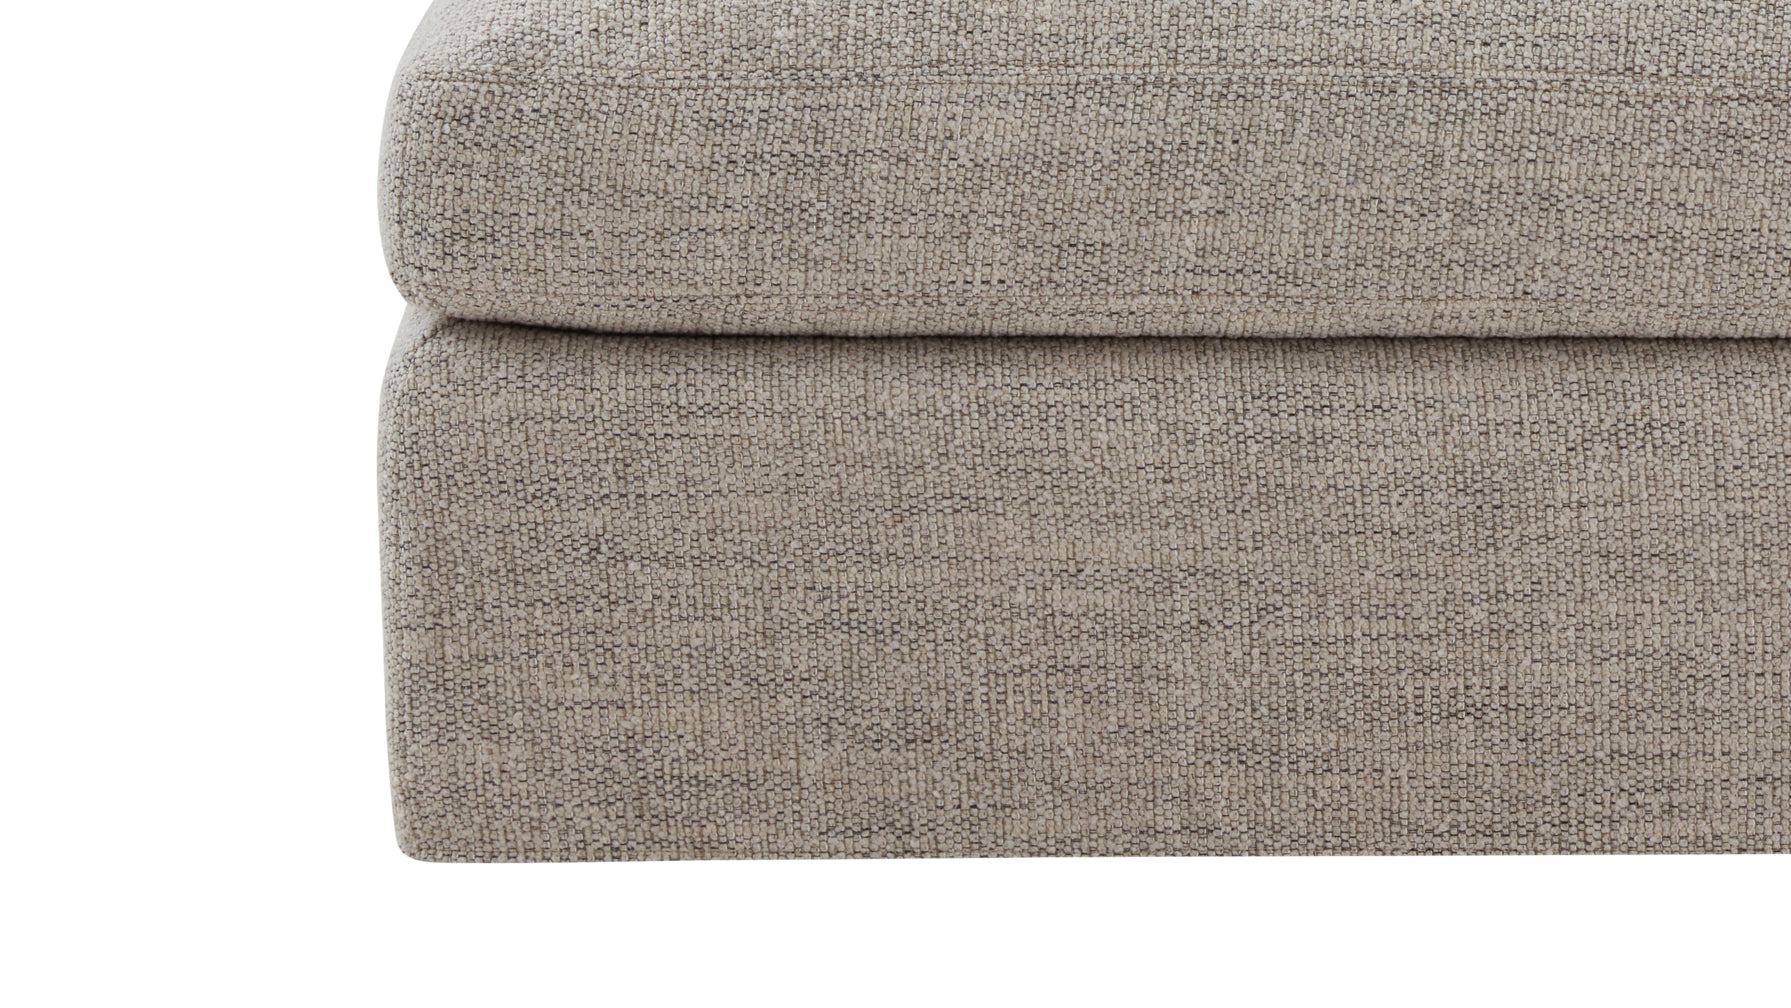 Get Together™ Ottoman, Large, Oatmeal - Image 7